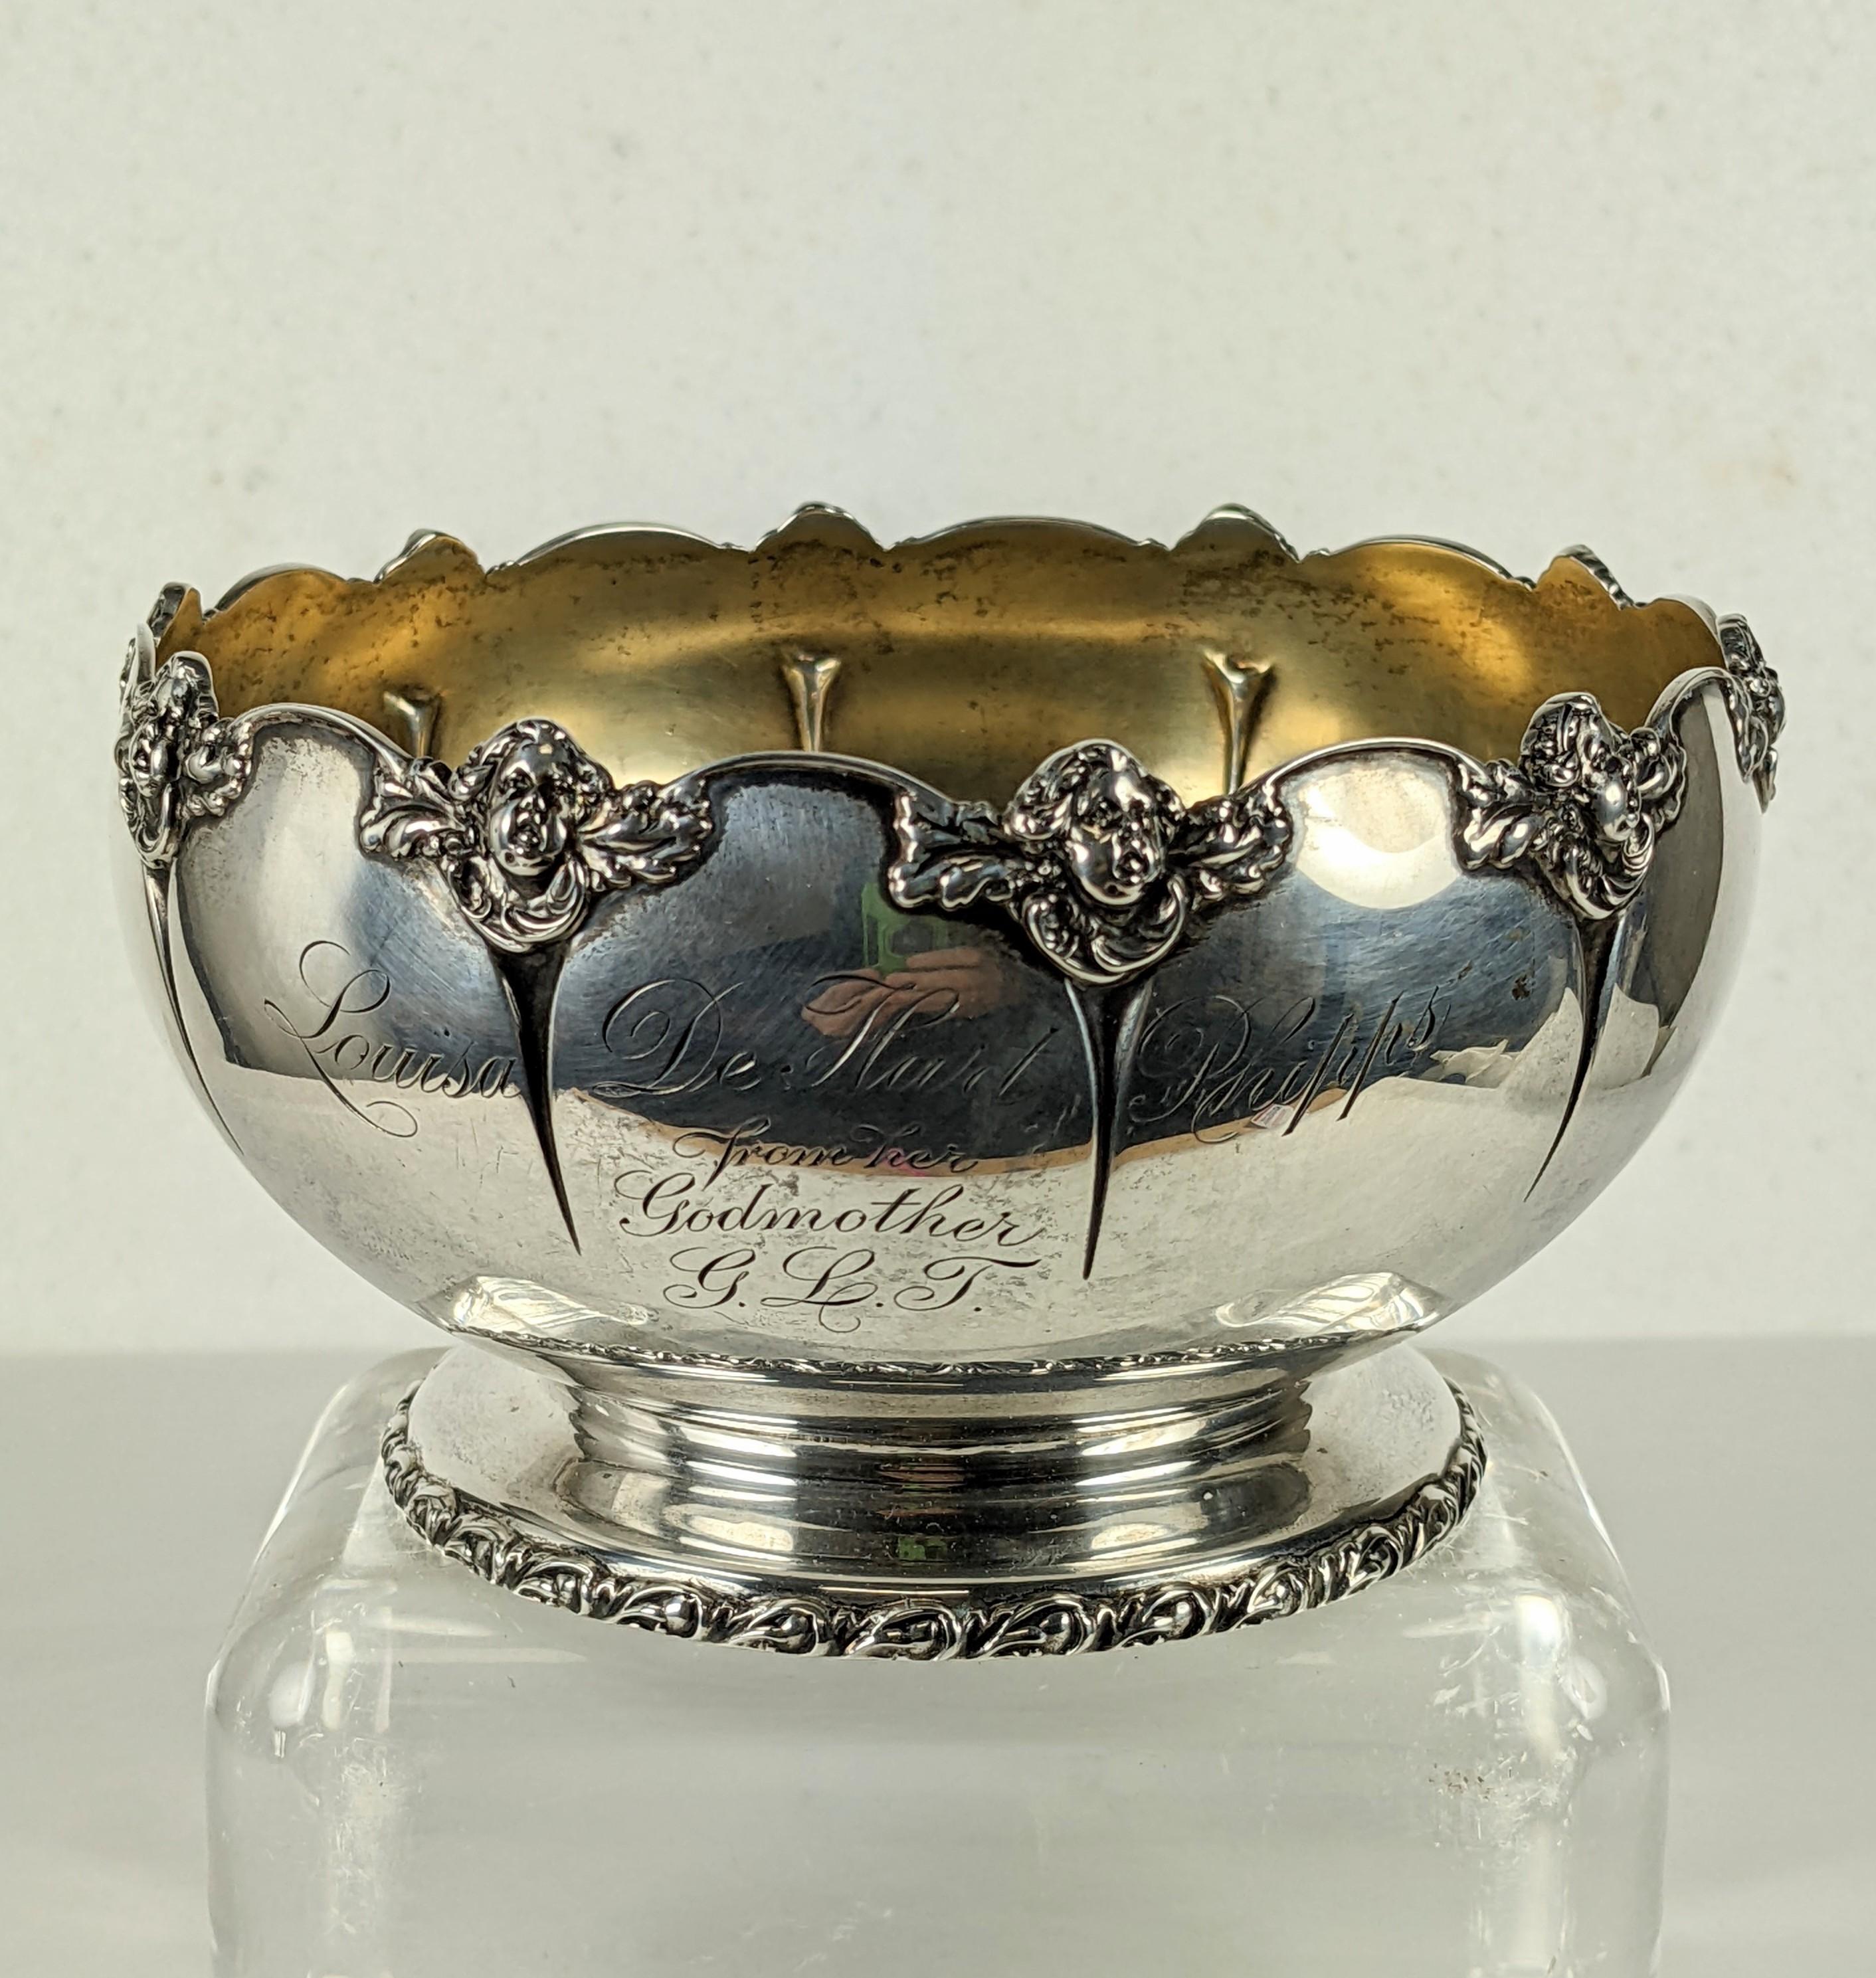 Charming angel adorned bowl by Gorham Manufacturing Co. circa 1870's-80's, perfect for candy or pot pourri. 
This bowl was inscribed to Louisa De Hart Phipps who resided in Mo. and passed away at only 33 years old in 1881. It was given to her by